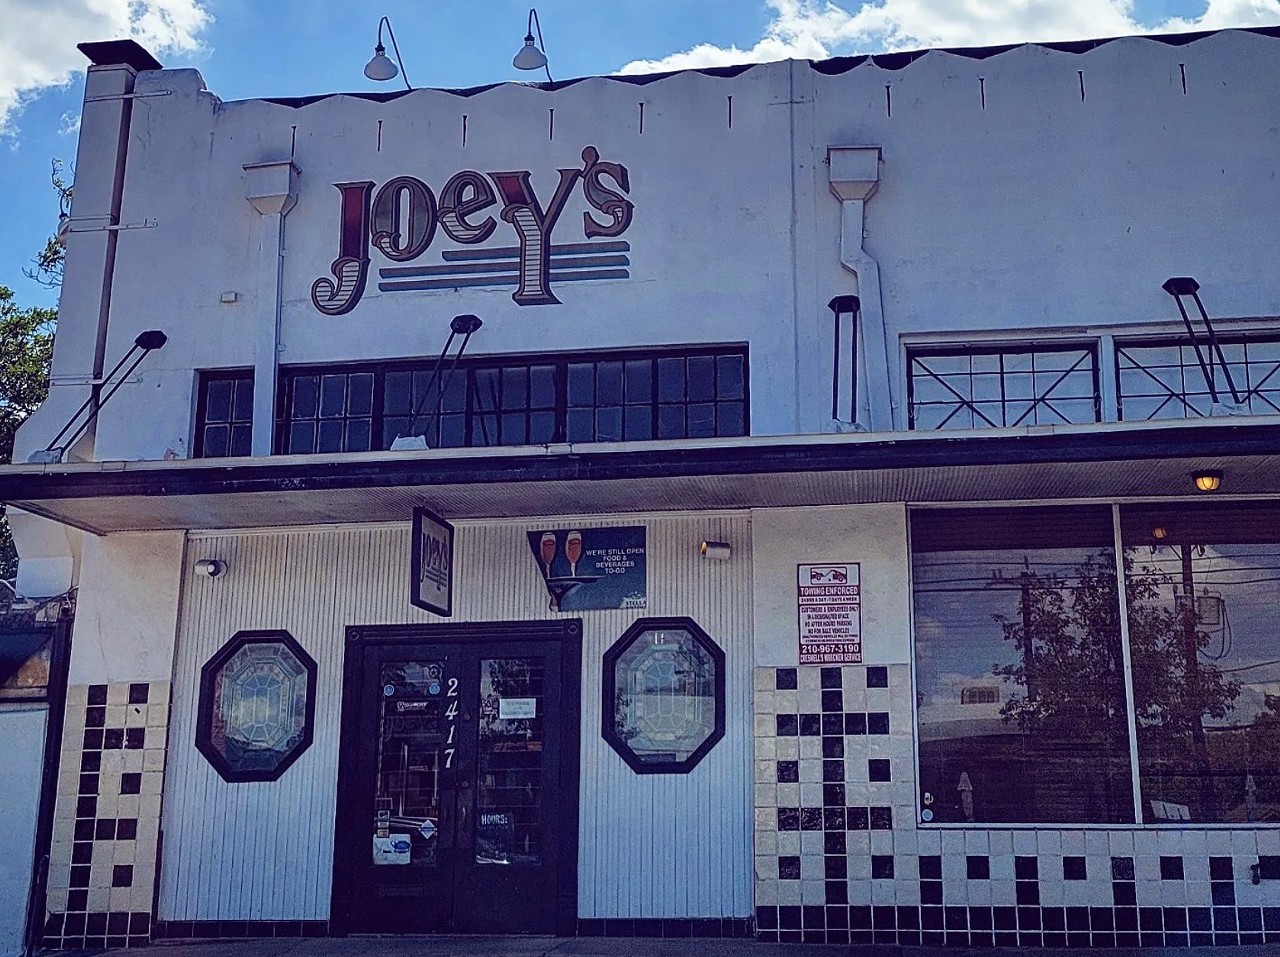 Joey’s
2417 N. St. Mary's St., (210) 733-9573, joeys-sa.com
No matter where your bar crawl takes you on the St. Mary’s Strip, you should always make it a point to hit up Joey’s. Drink specials, bar food, multiple pool tables and ample outdoor seating make for an all-around good night of getting boozy.